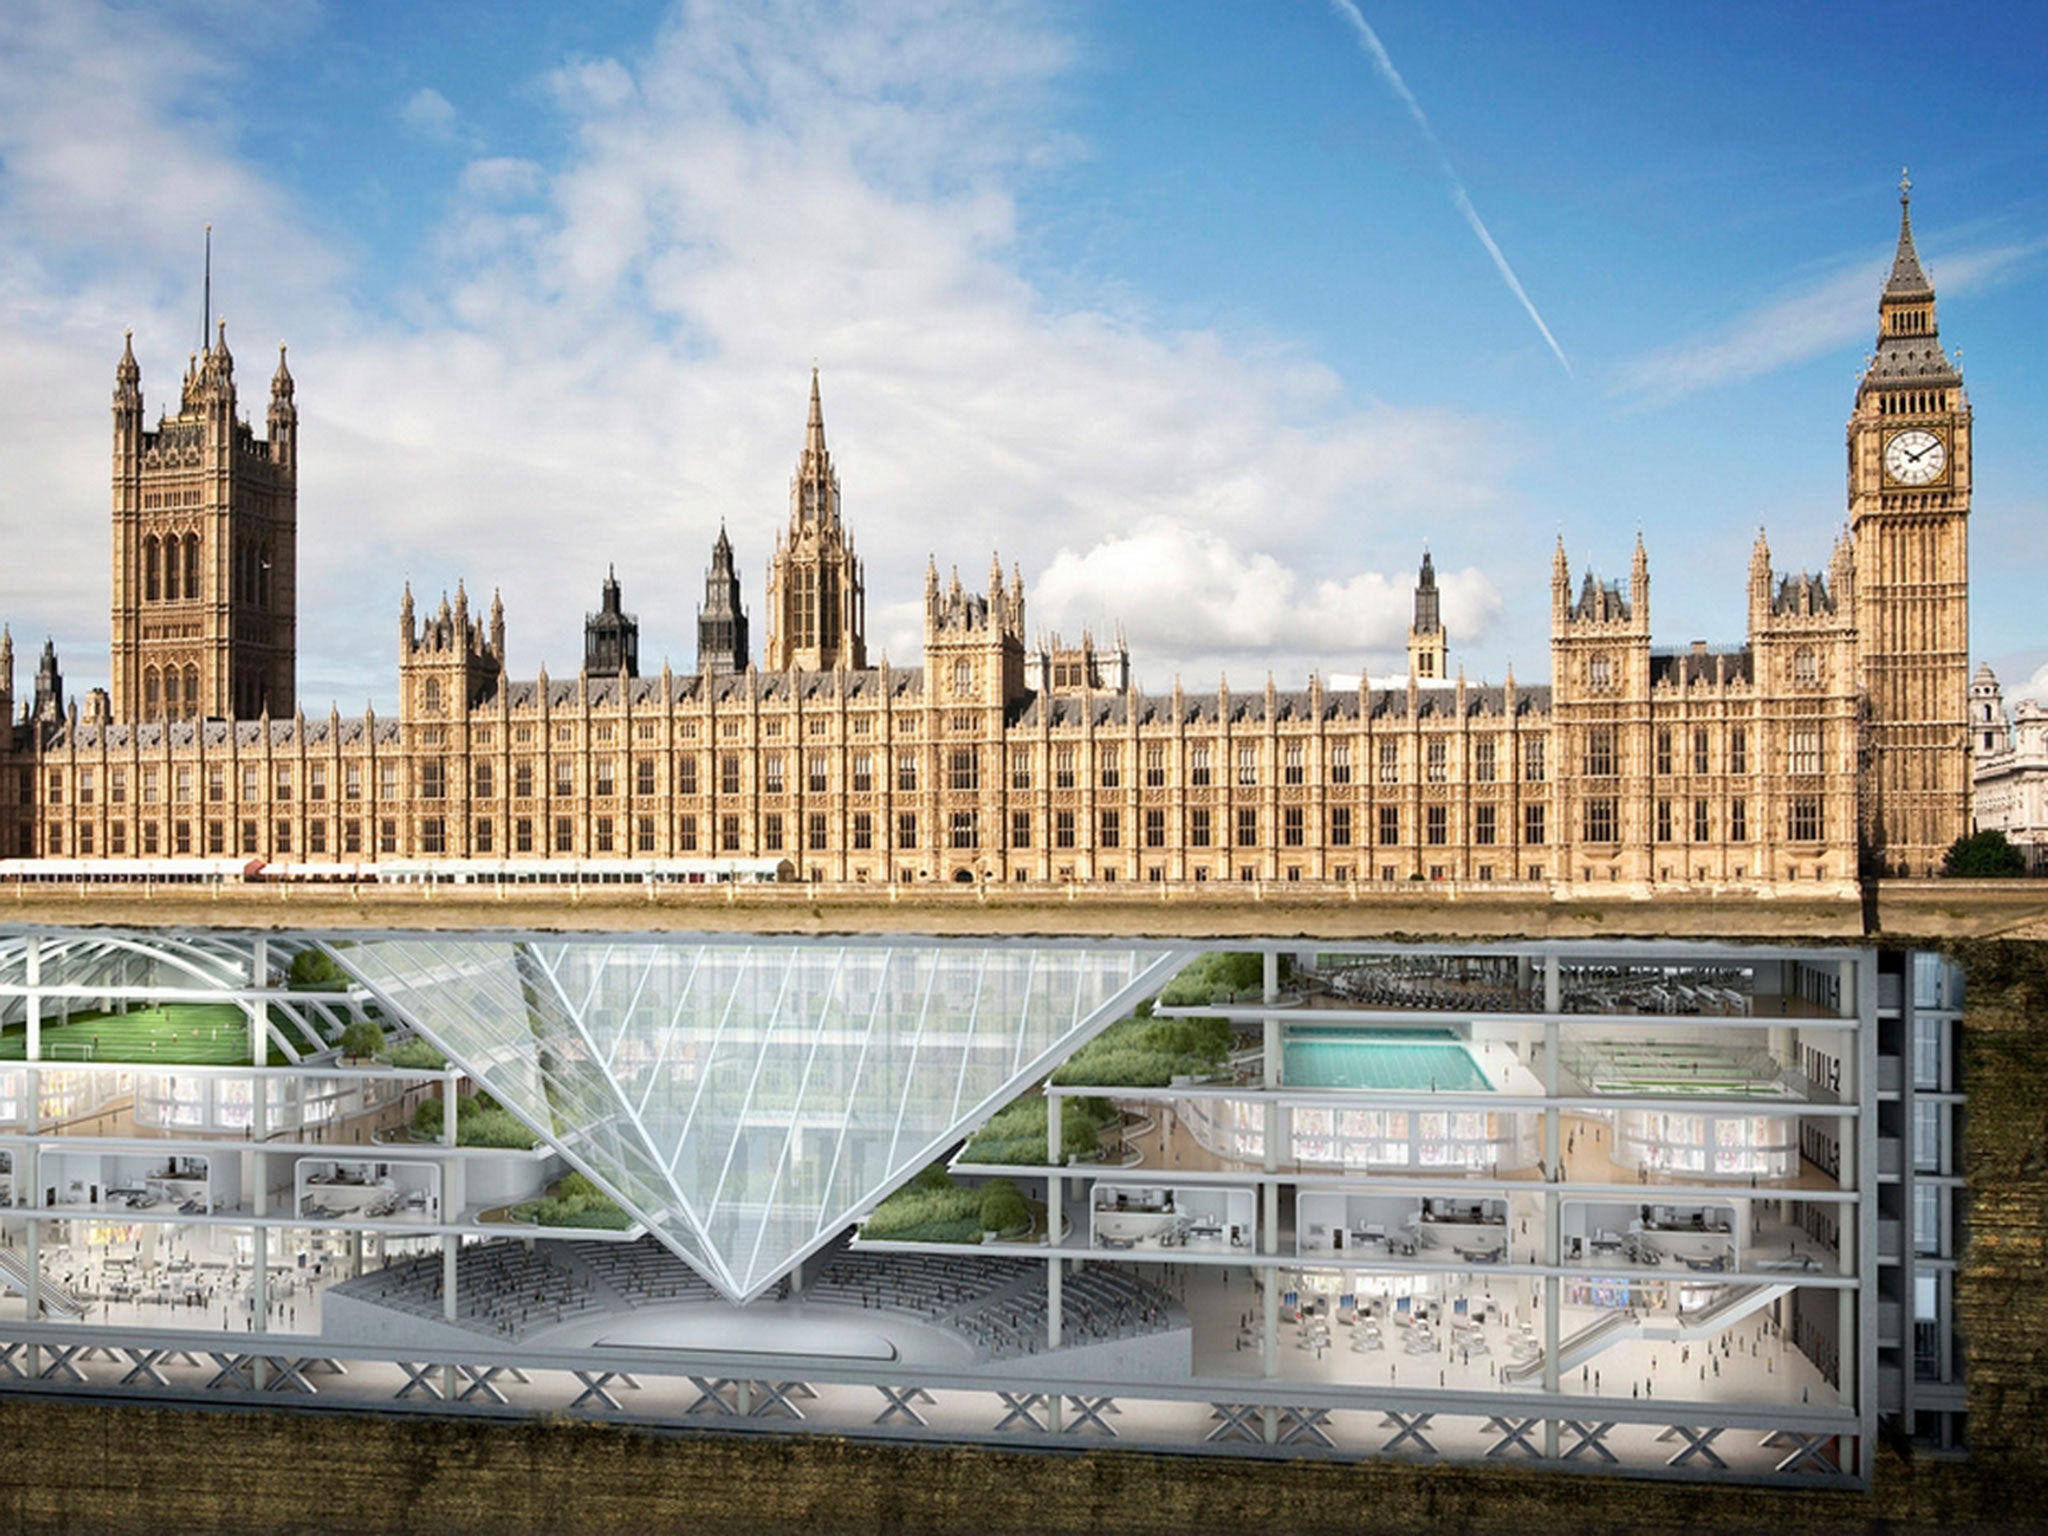 Future MPs will spend much of their time hidden underground, with the House of Commons set above an enormous six storey underground complex